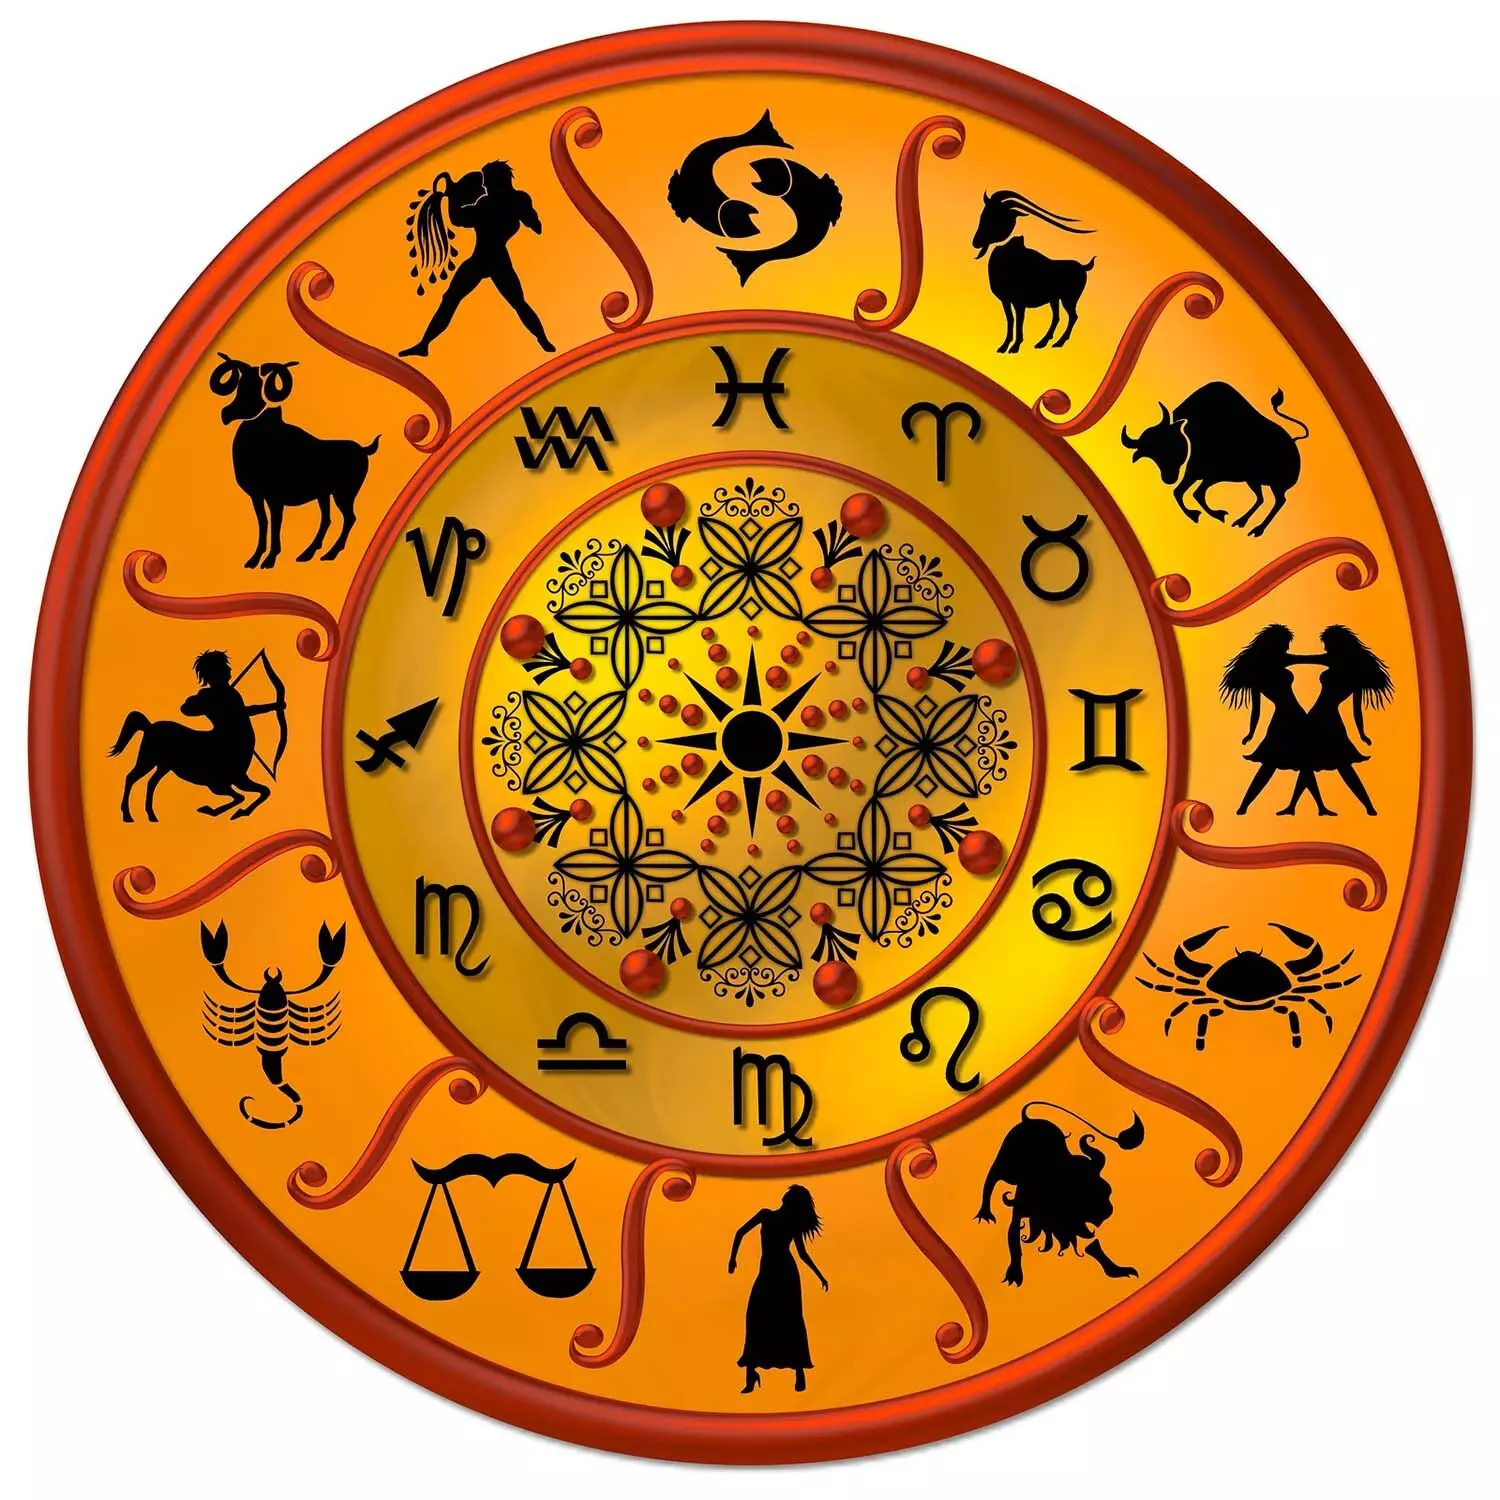 18 July – Know your todays horoscope